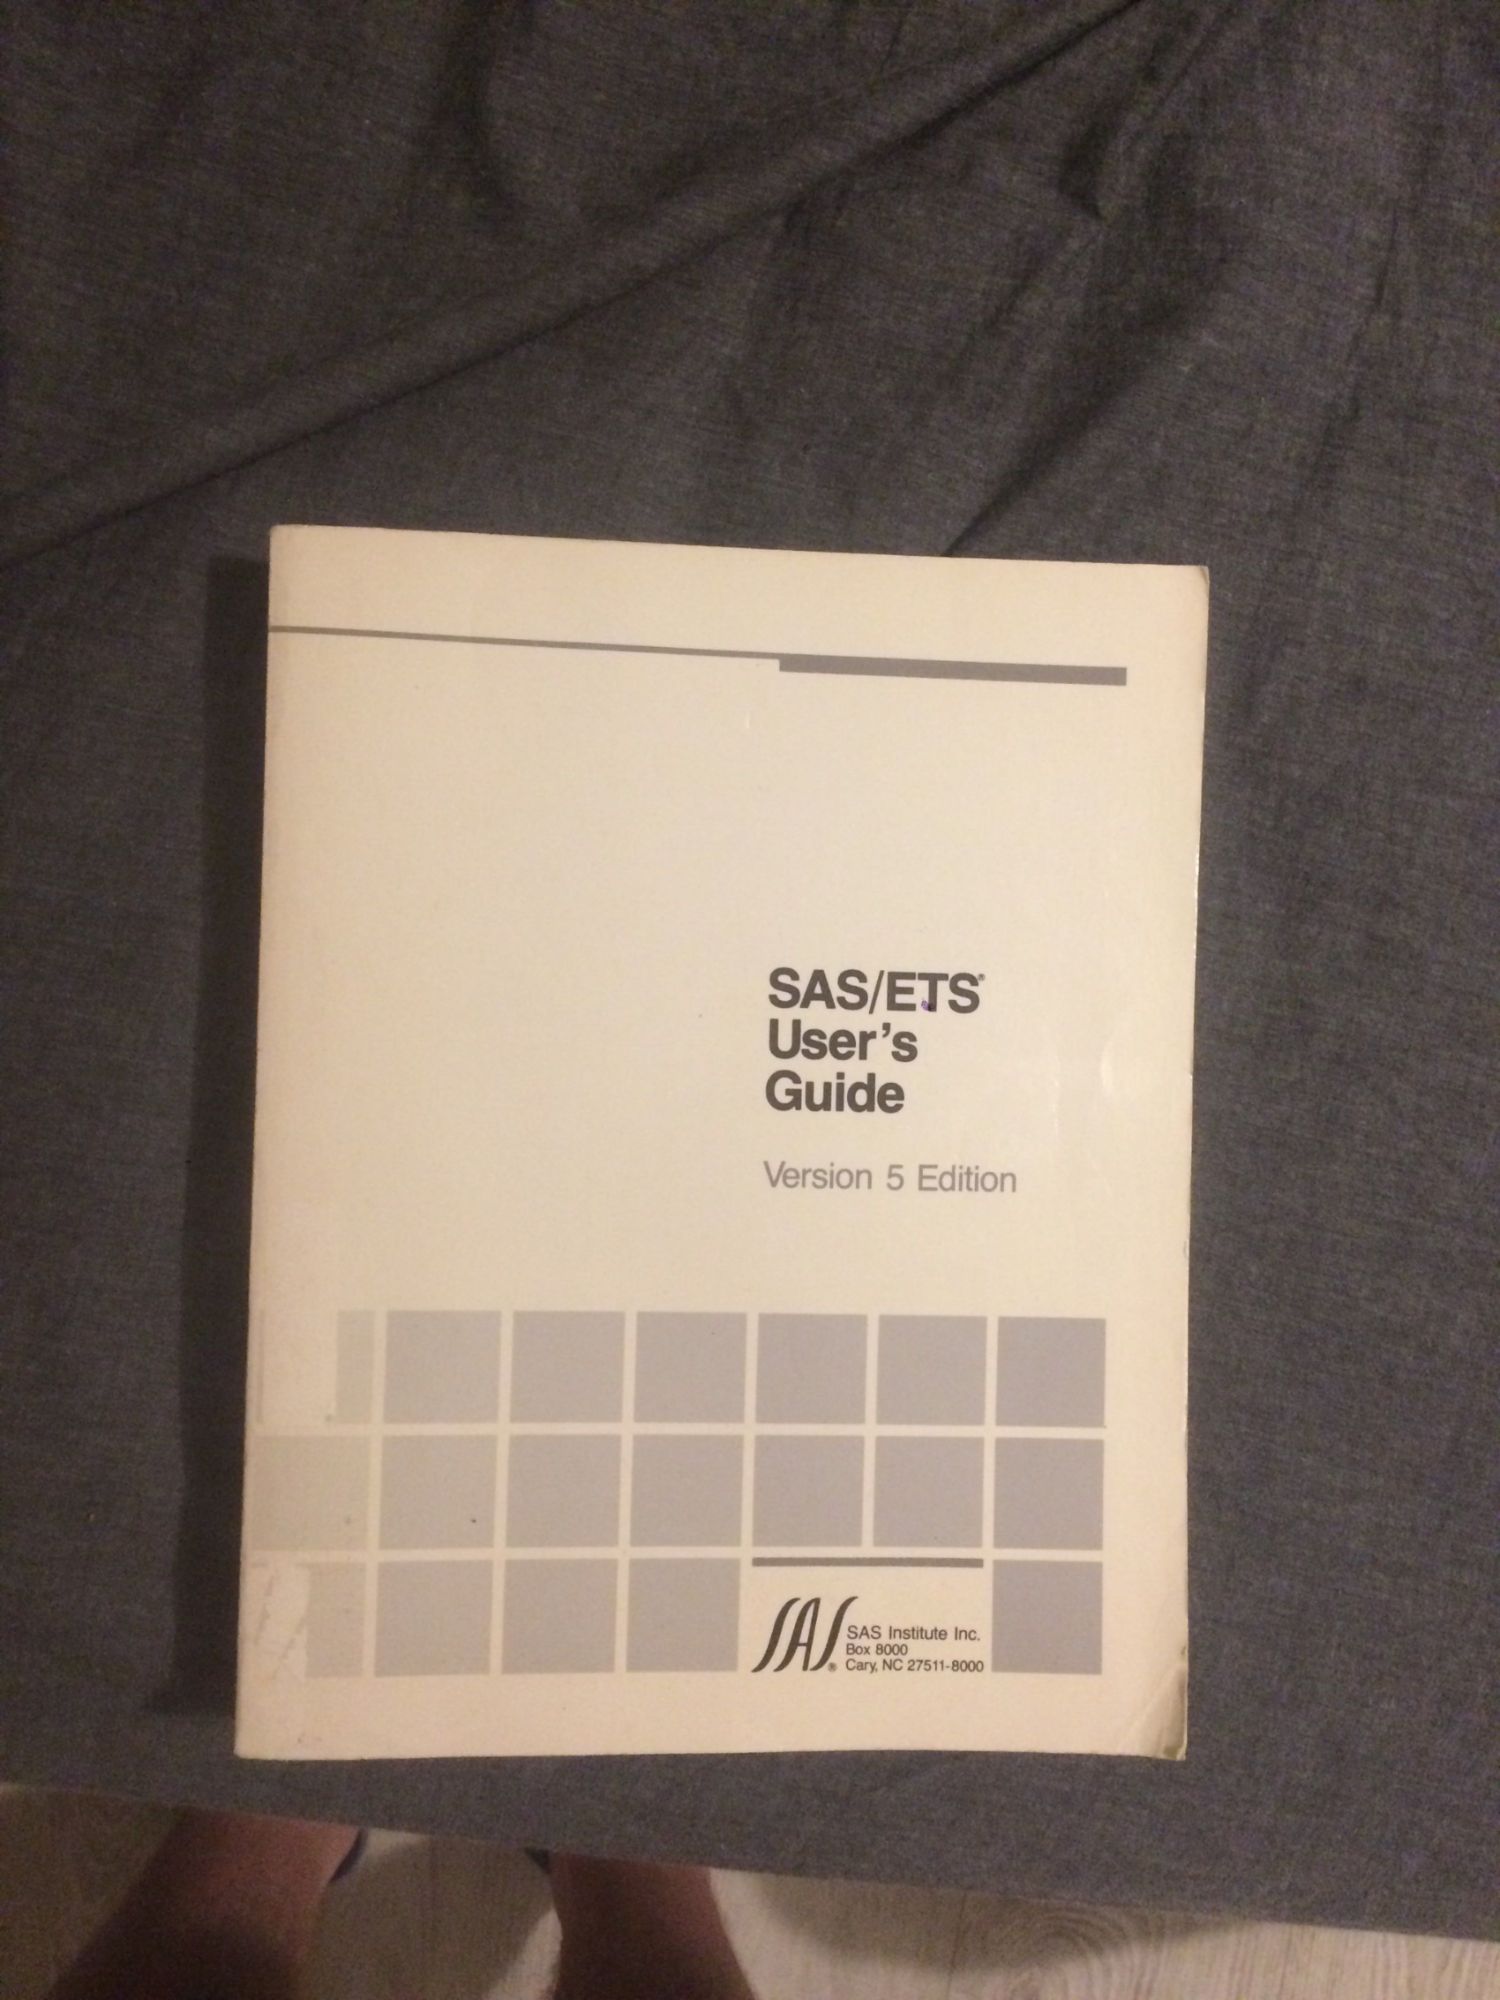 Sas Ets User's Guide Version 5 Edition